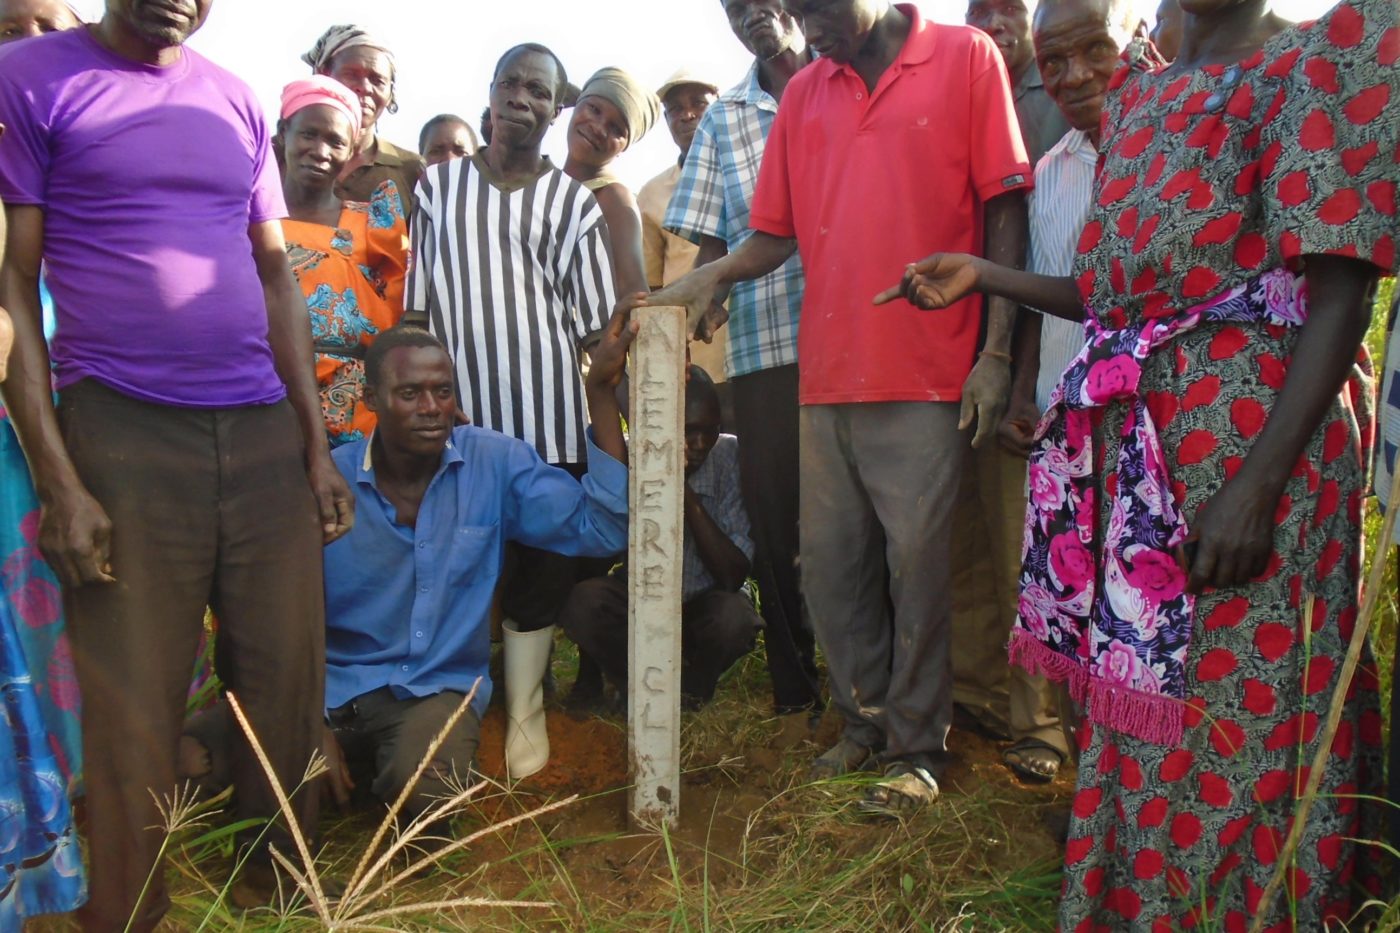 Residents of the community with their new community land boundary markers